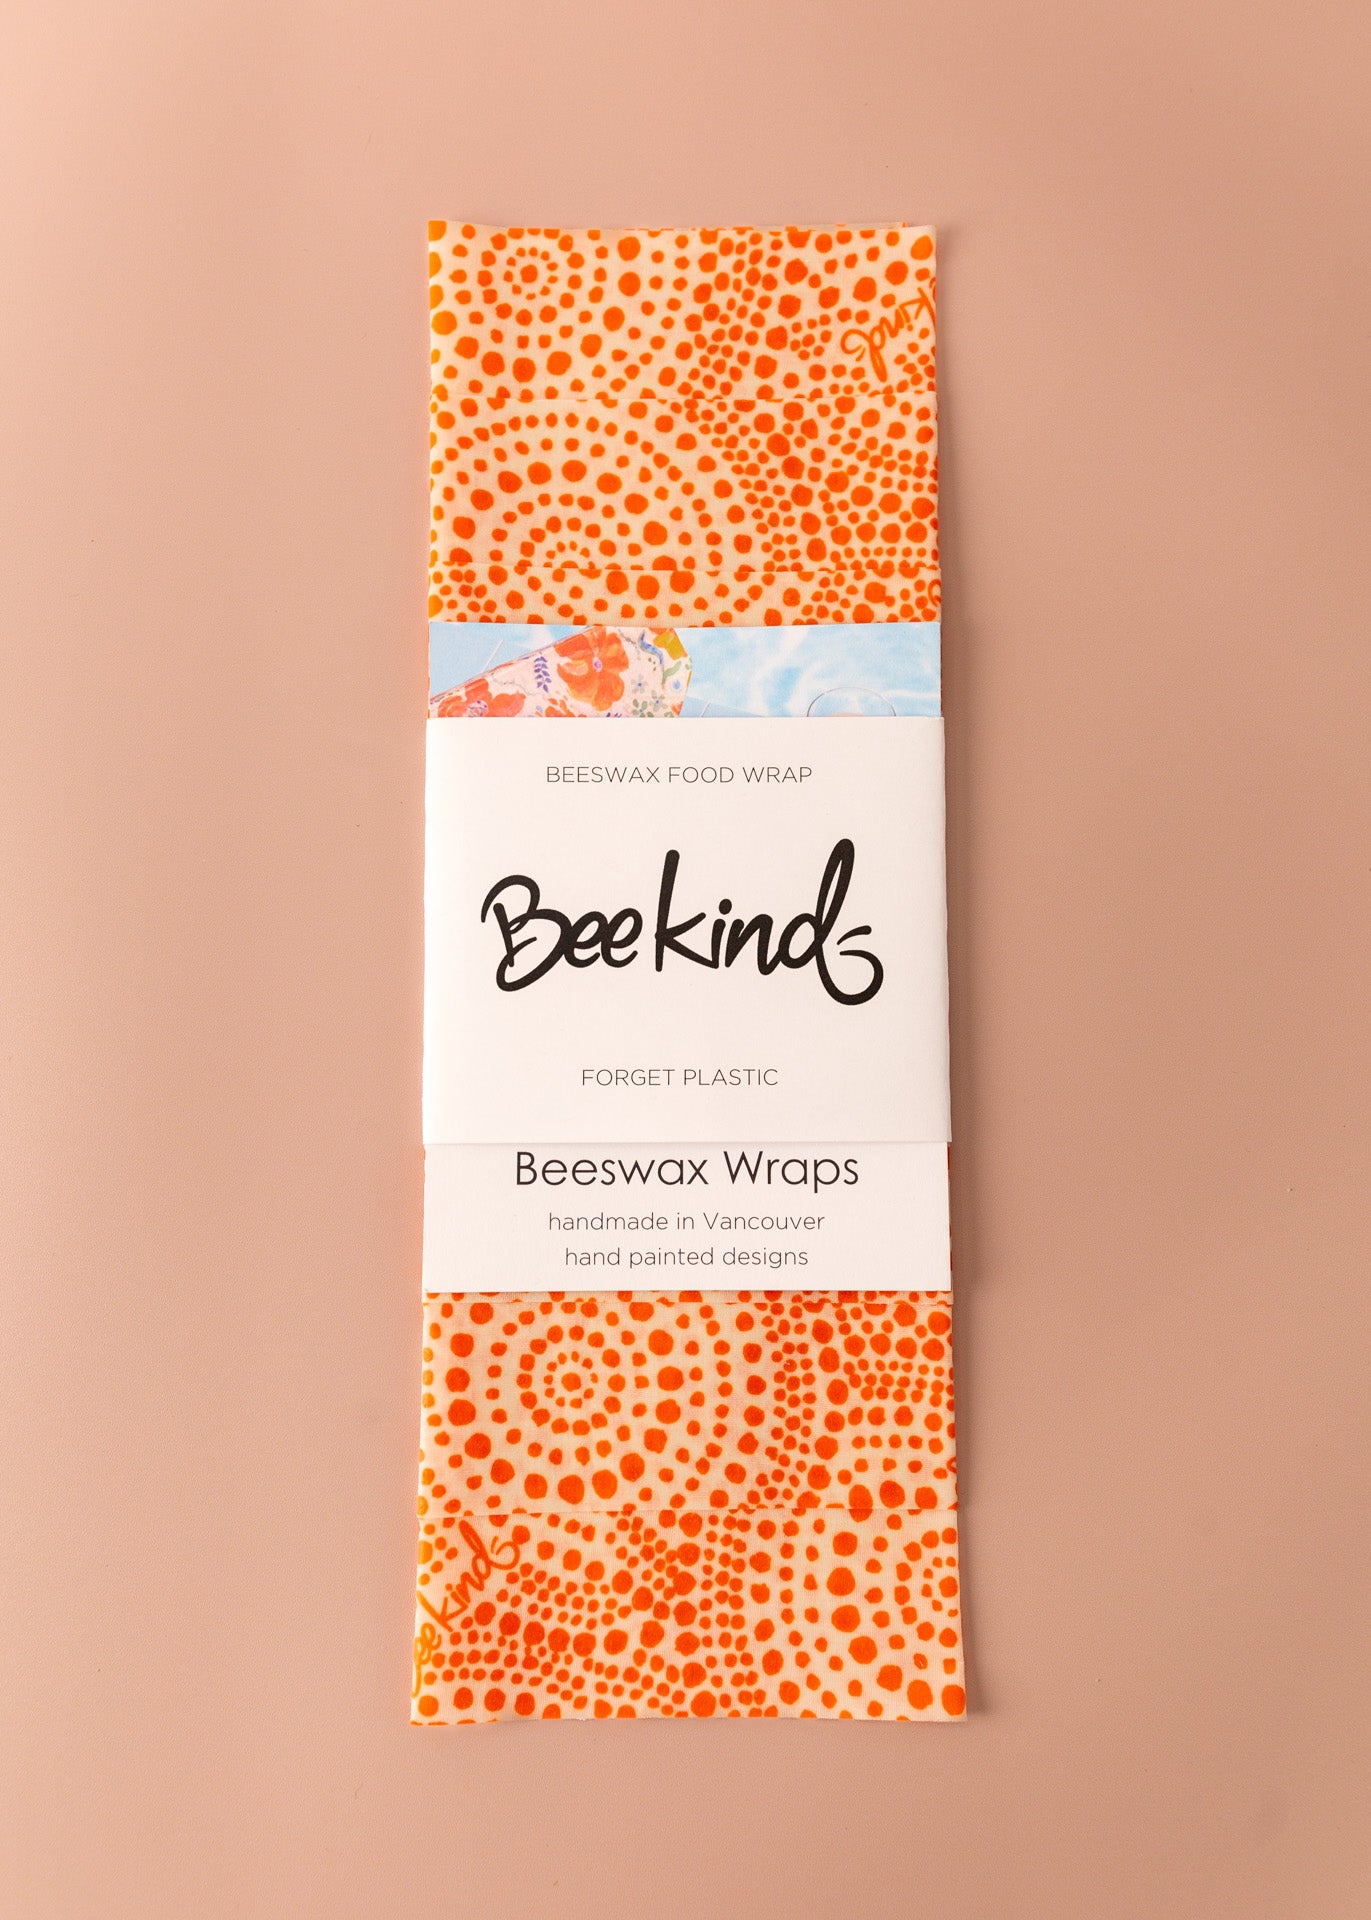 Set of 3 beeswax wraps that are light orange with darker prange dots throughout in a circle pattern, folded with a white label saying &quot;beekind&quot; on a pink flatlay